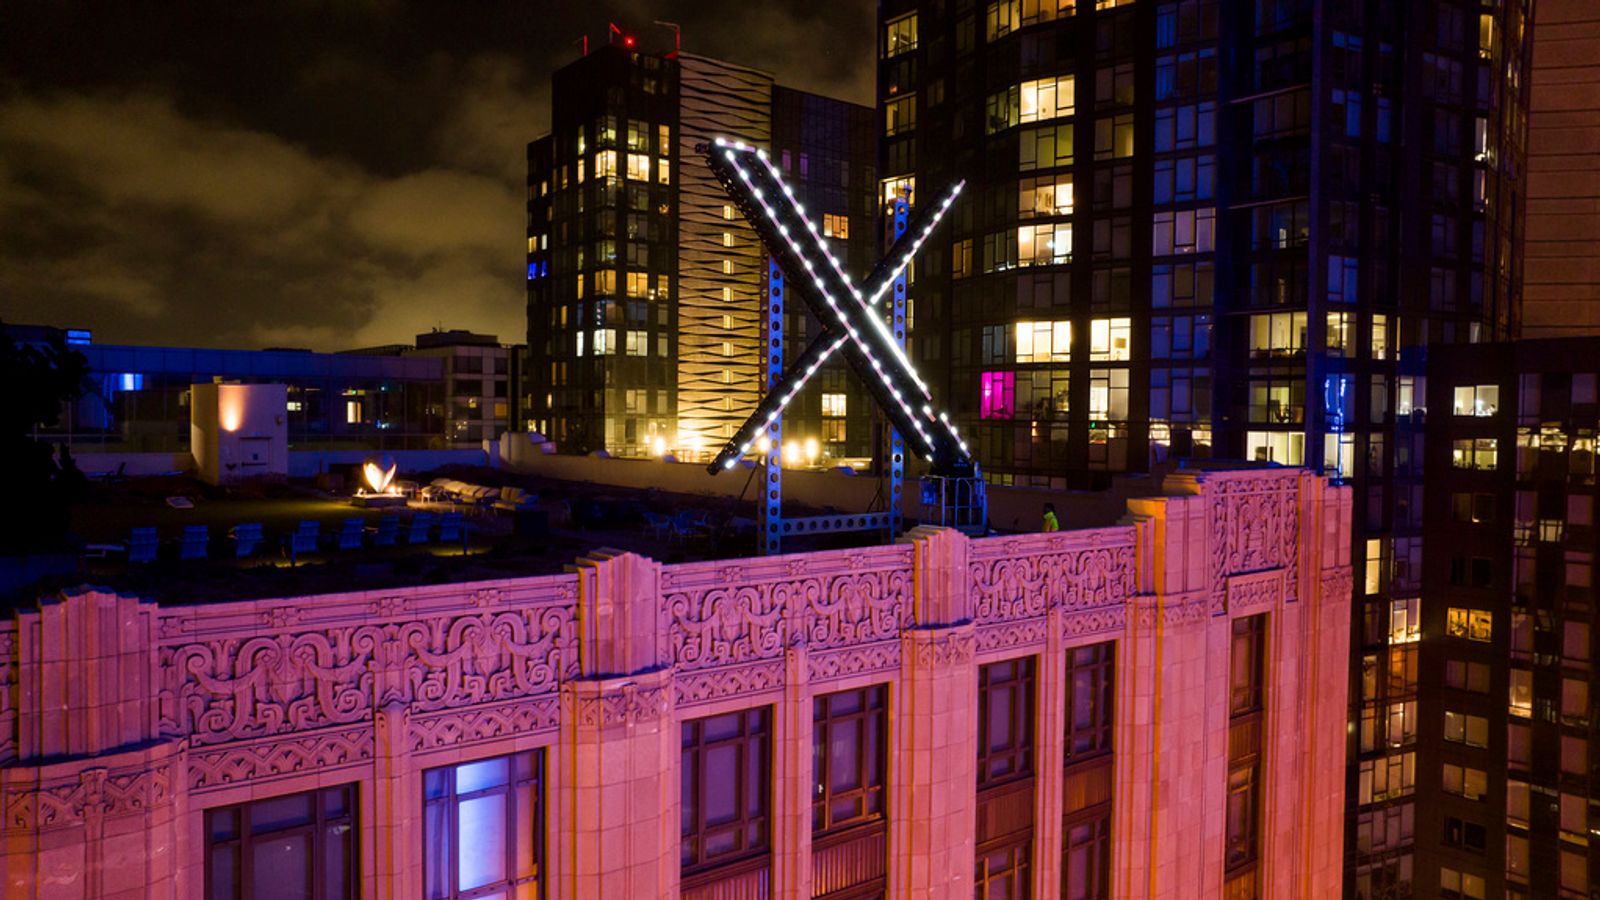 Giant flashing X sign removed from Twitter's San Francisco HQ after complaints and investigation